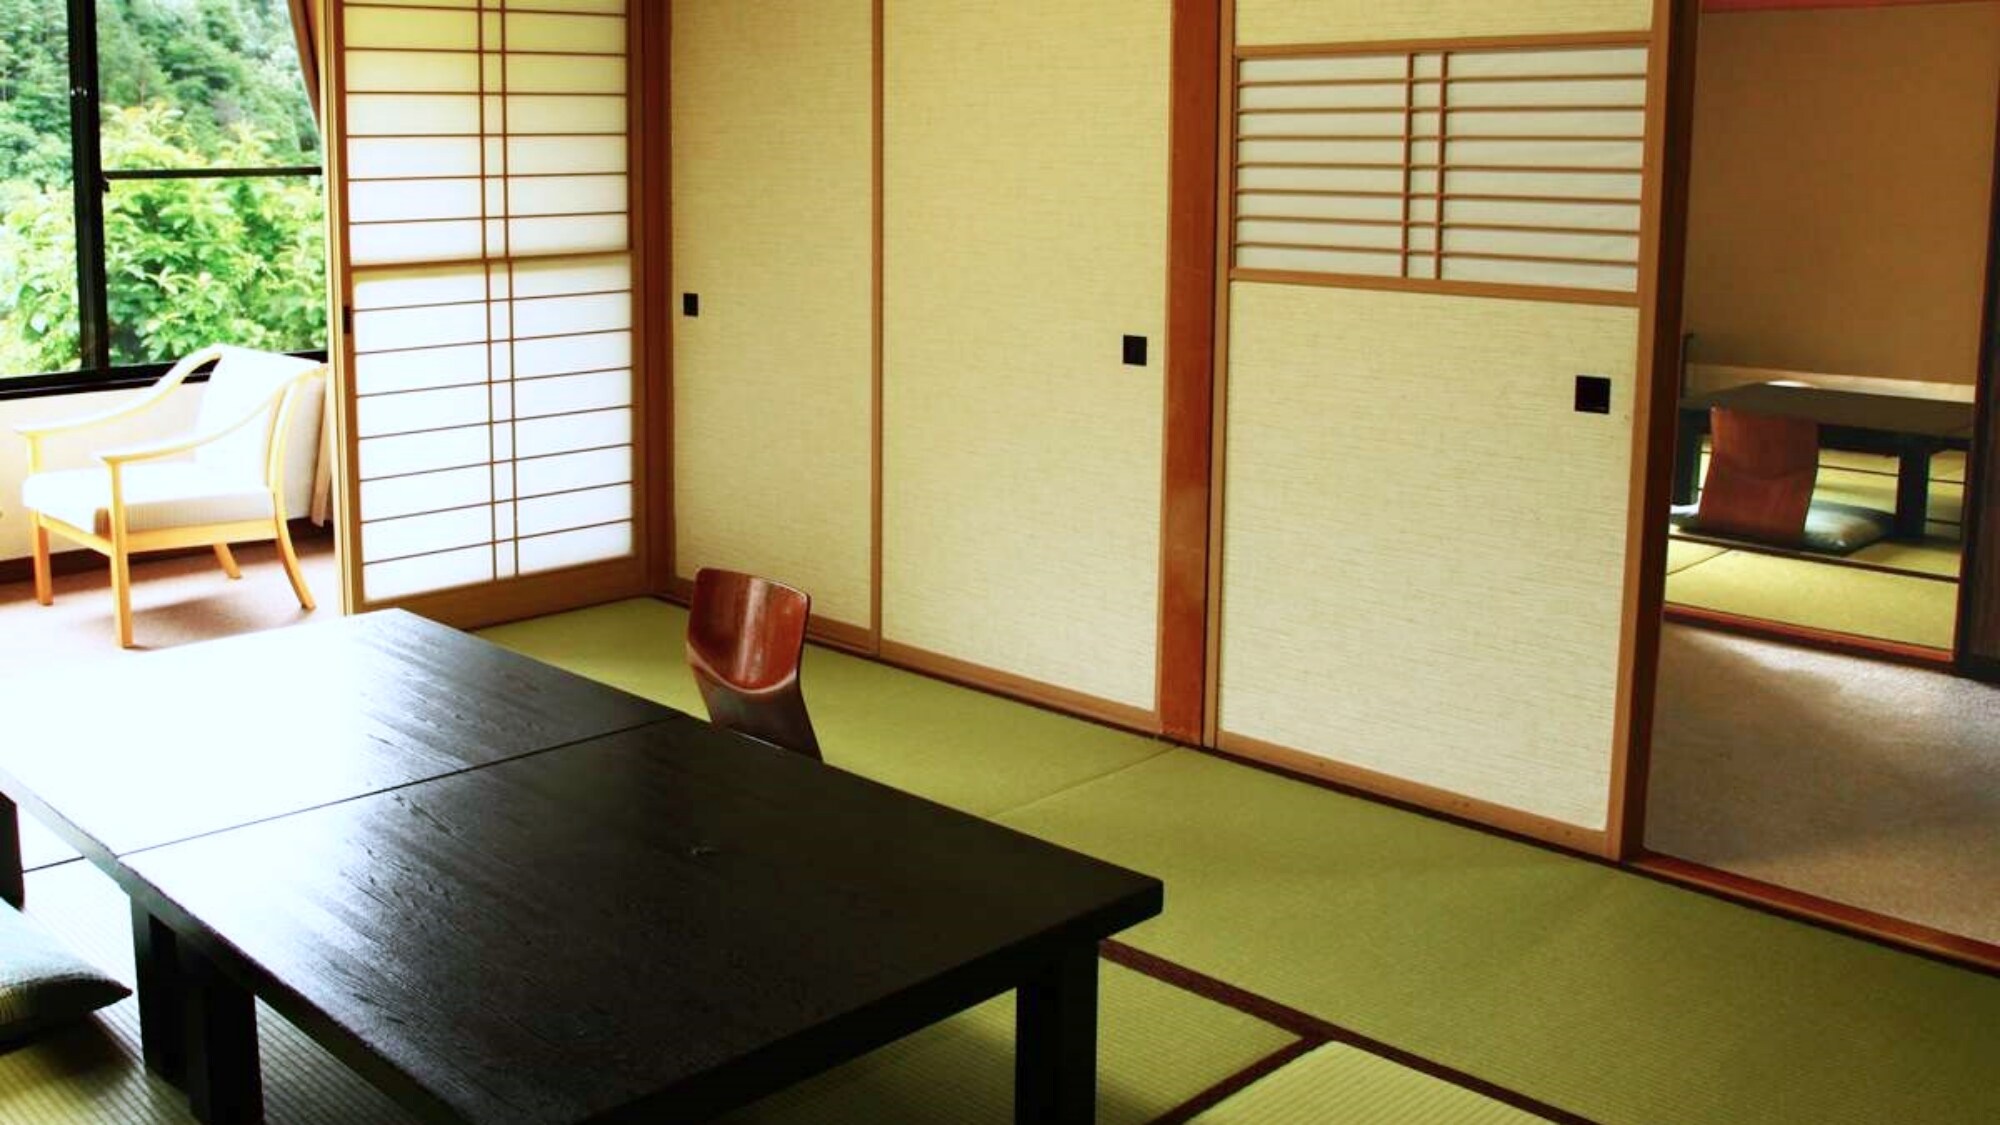 [Main building] Standard guest room: Japanese-style room 10-12 tatami mats / next room [Capacity] 2-8 people